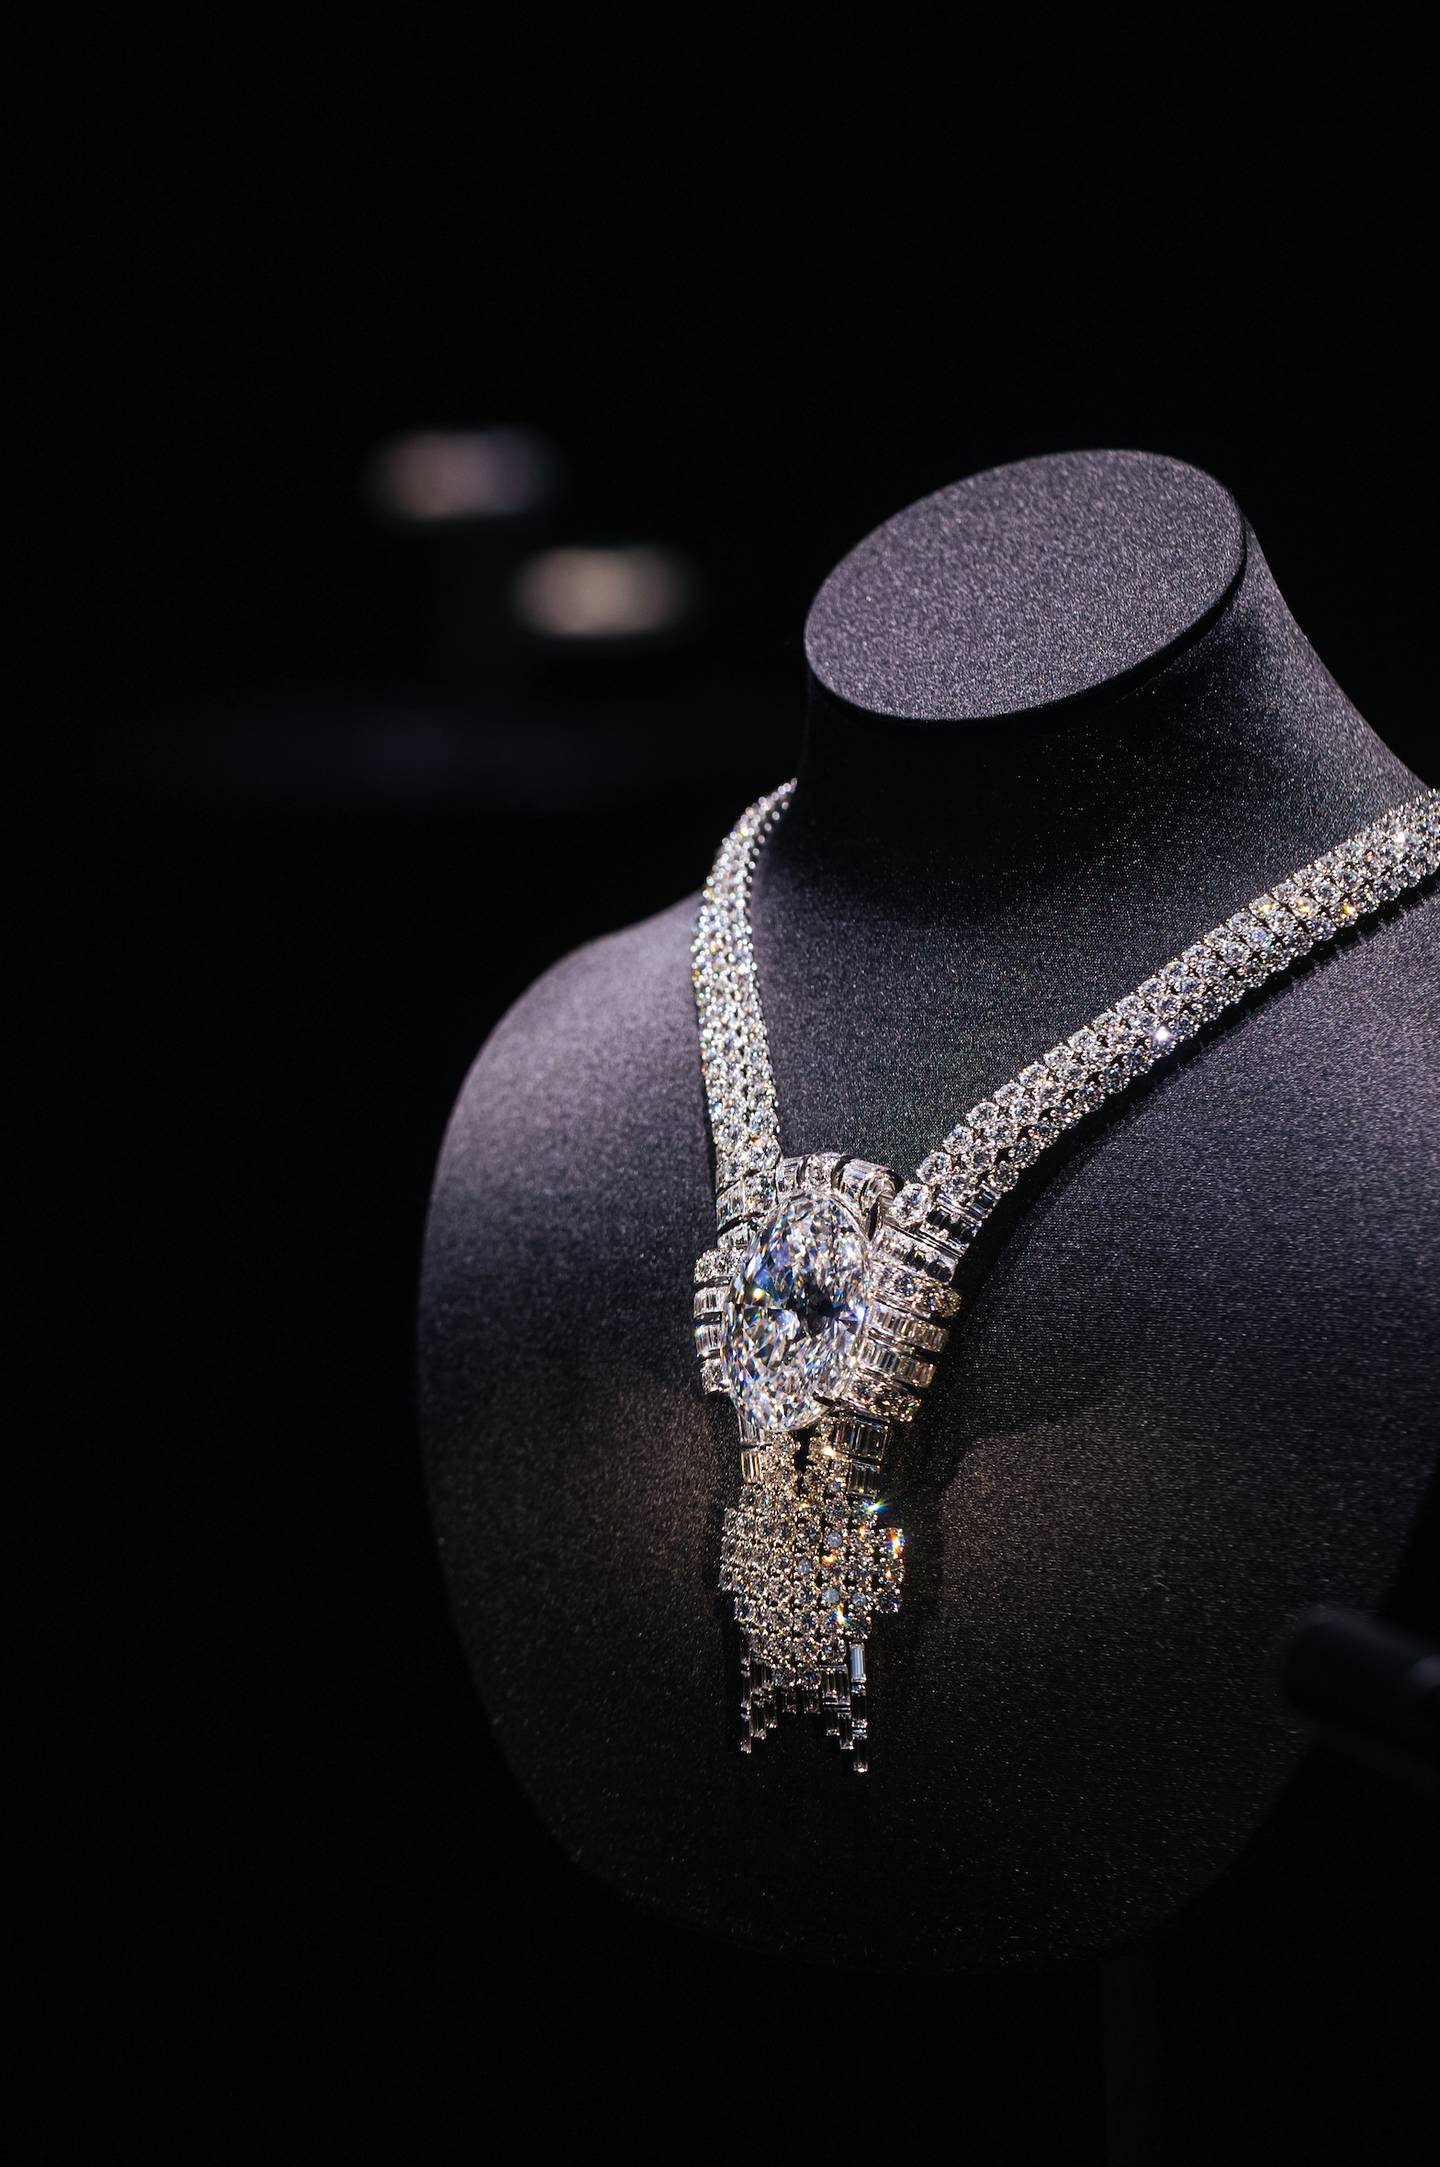 The Empire Diamond, which weighs more than 80-carats, sits at the heart of the new necklace. Photo: Tiffany & Co